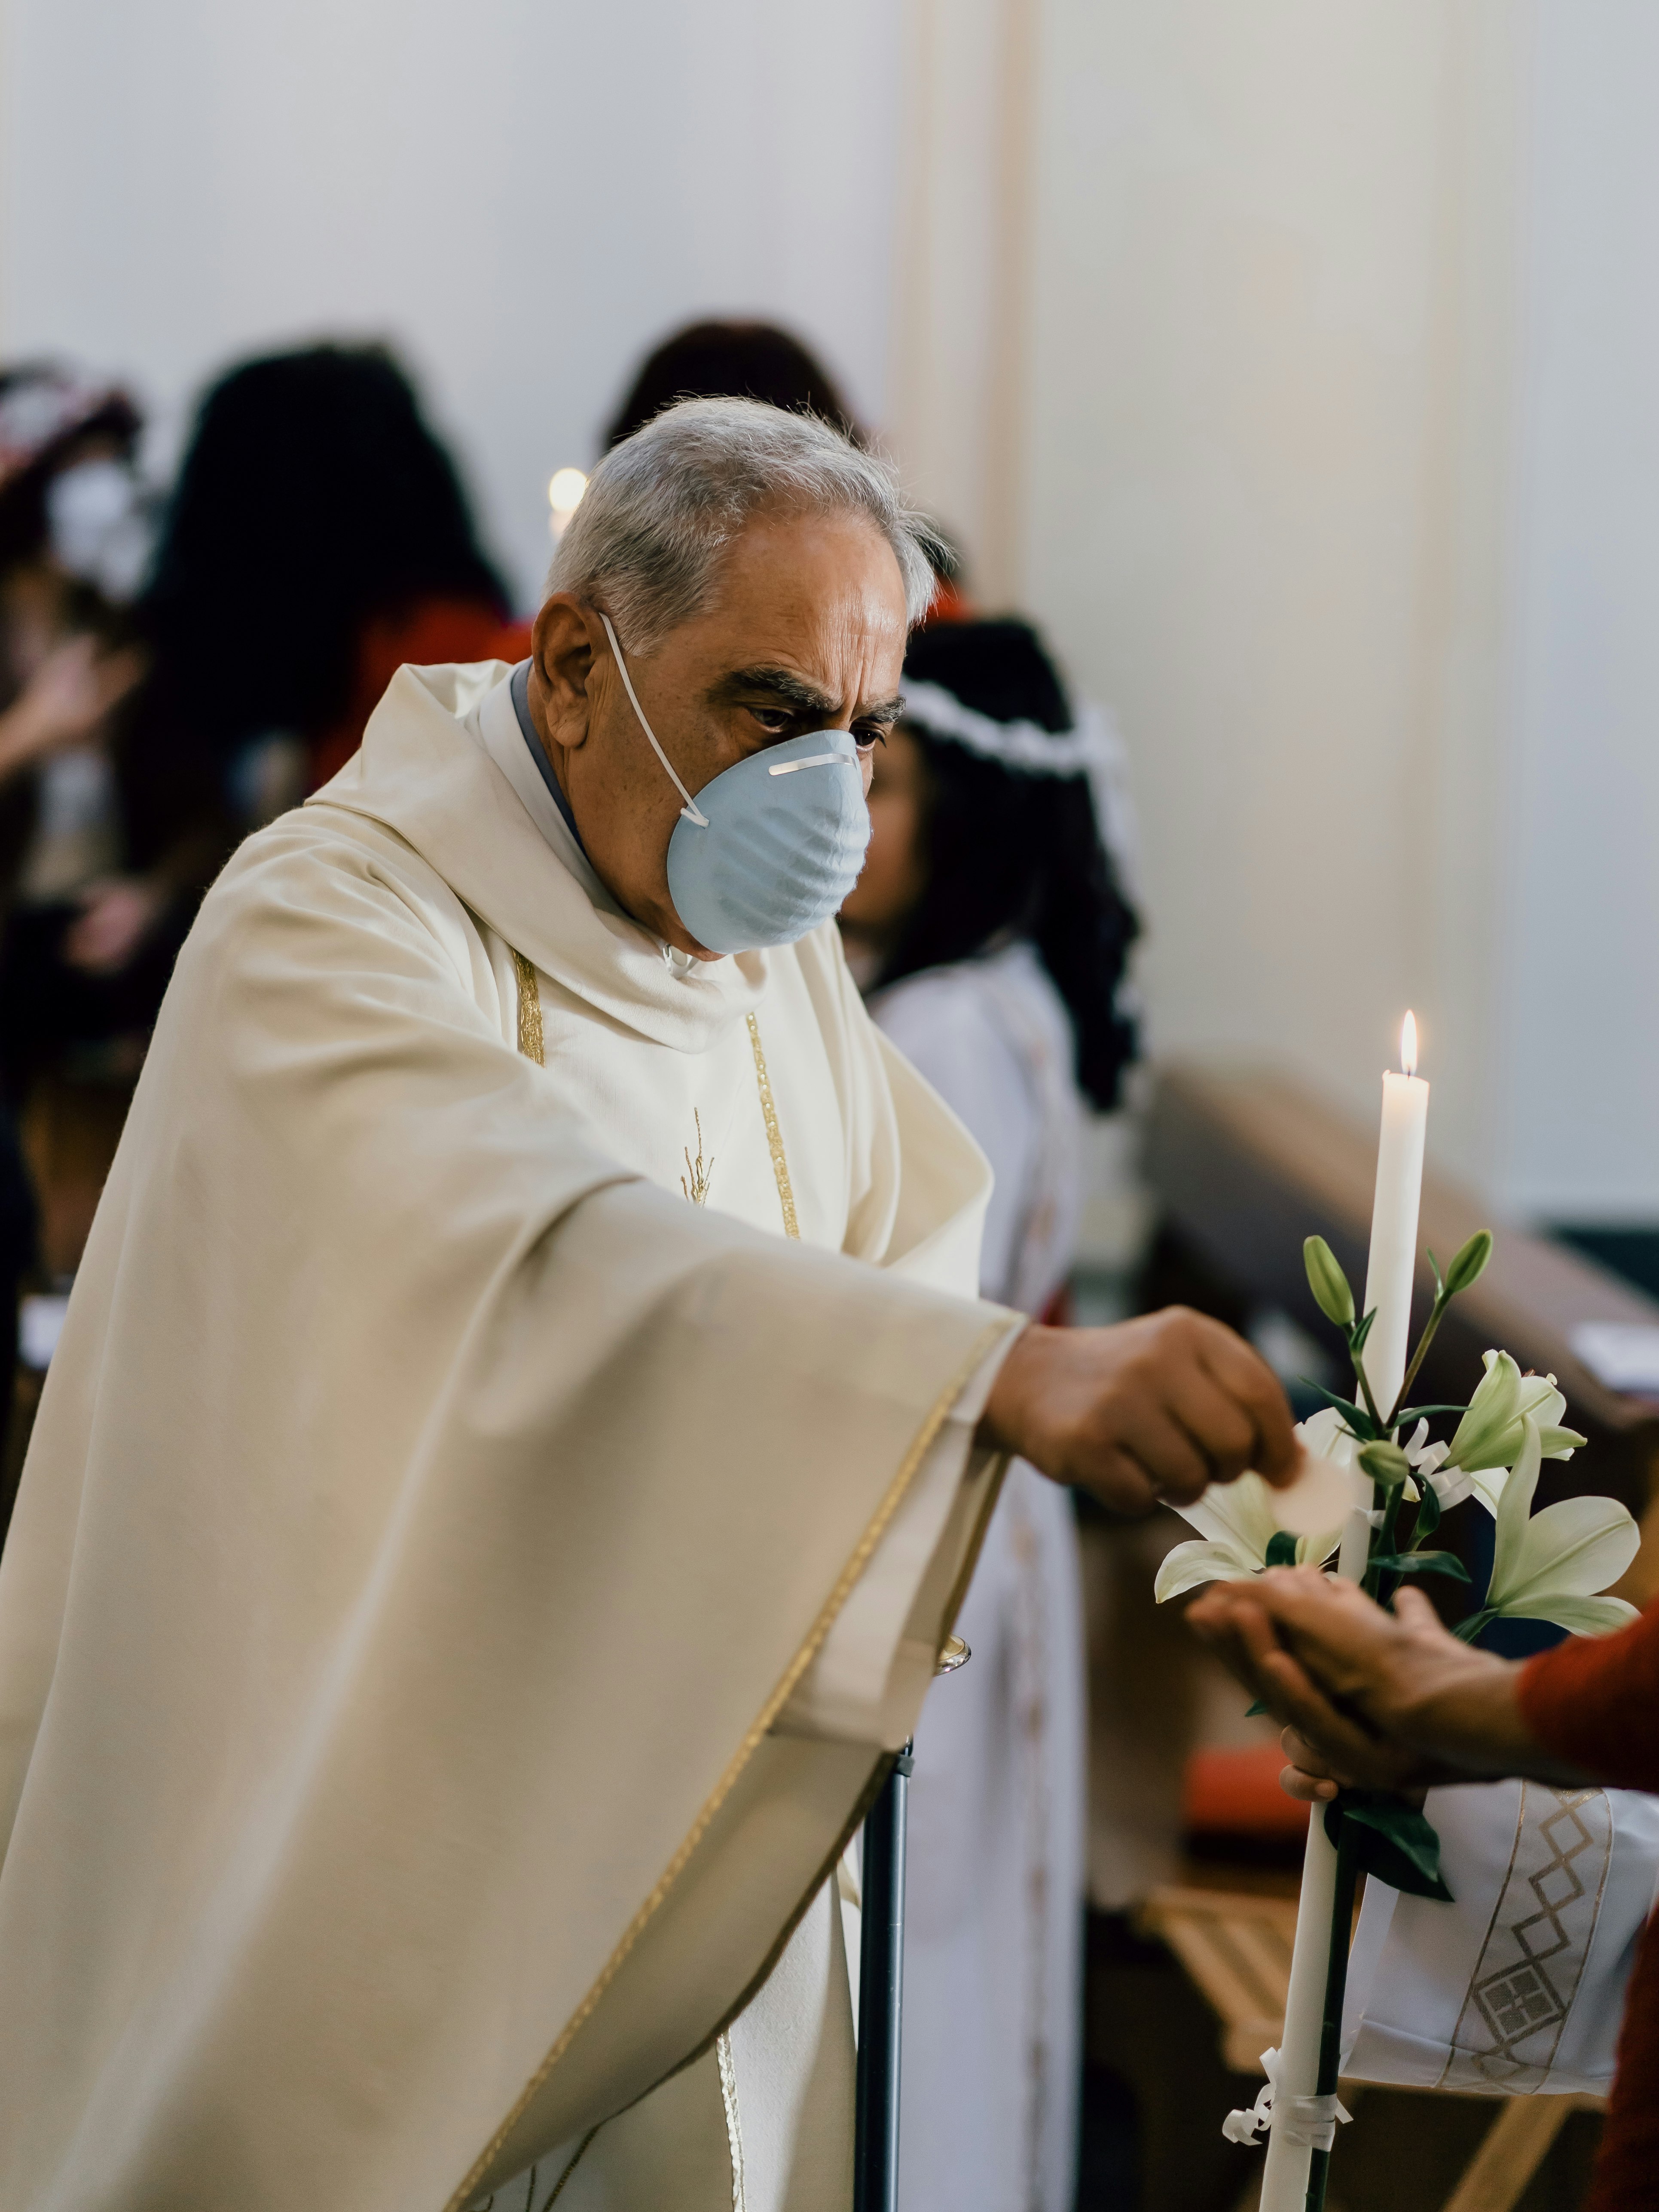 A Catholic priest wearing a face mask places a Sacred Host in outstretched hands during Holy Communion